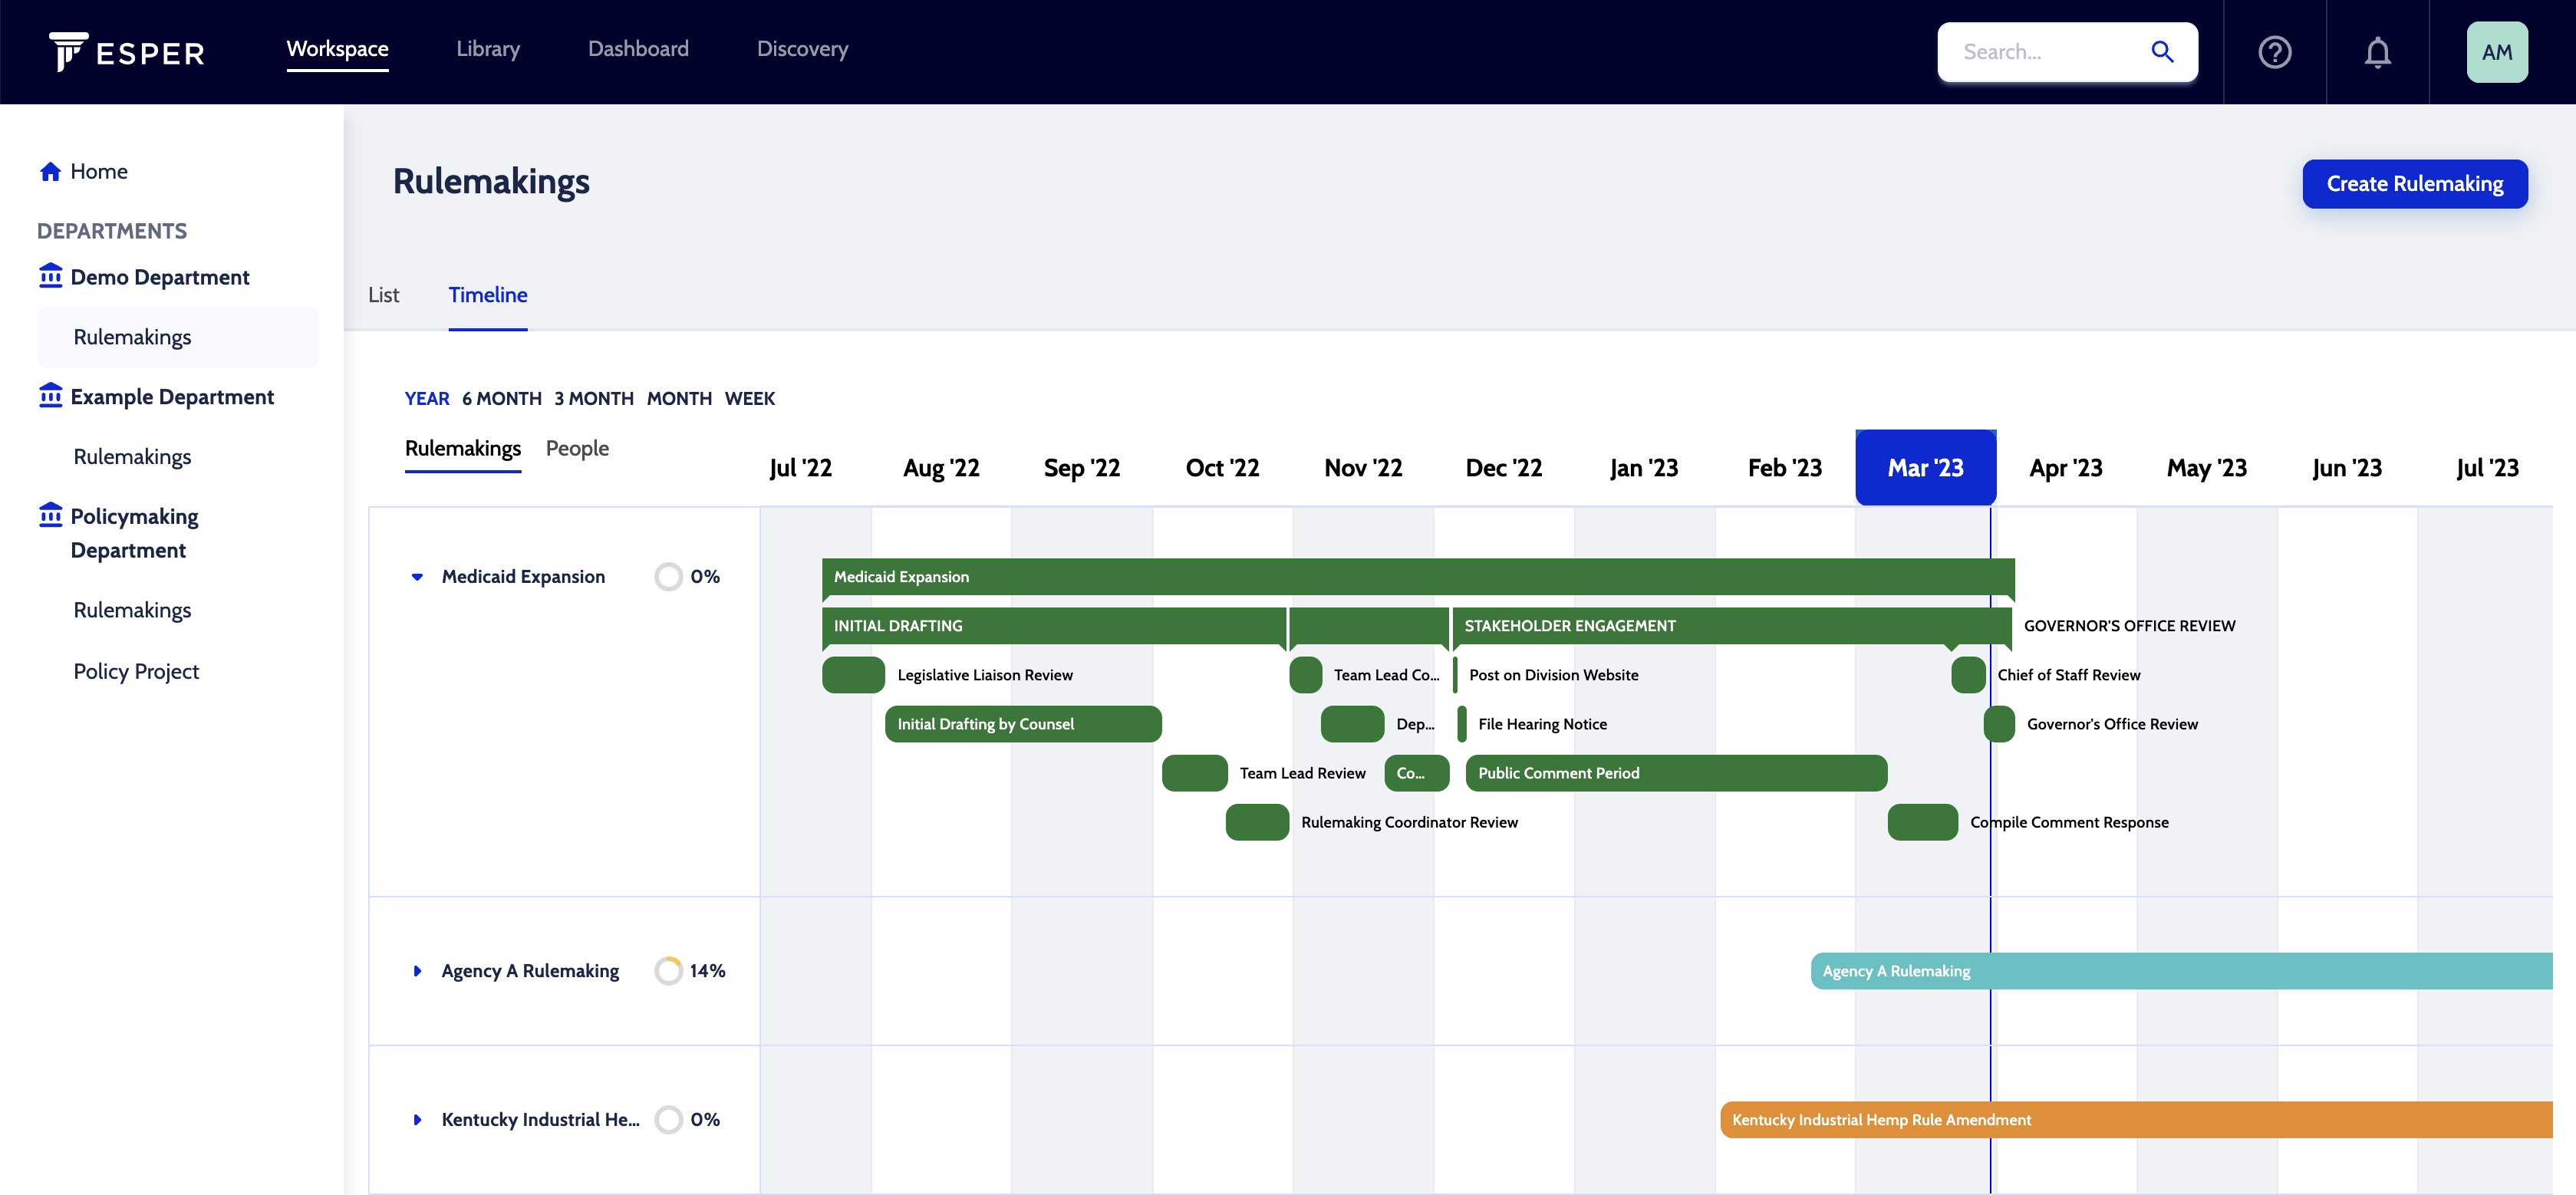 Esper’s rulemaking dashboard shows the timeline for policy projects